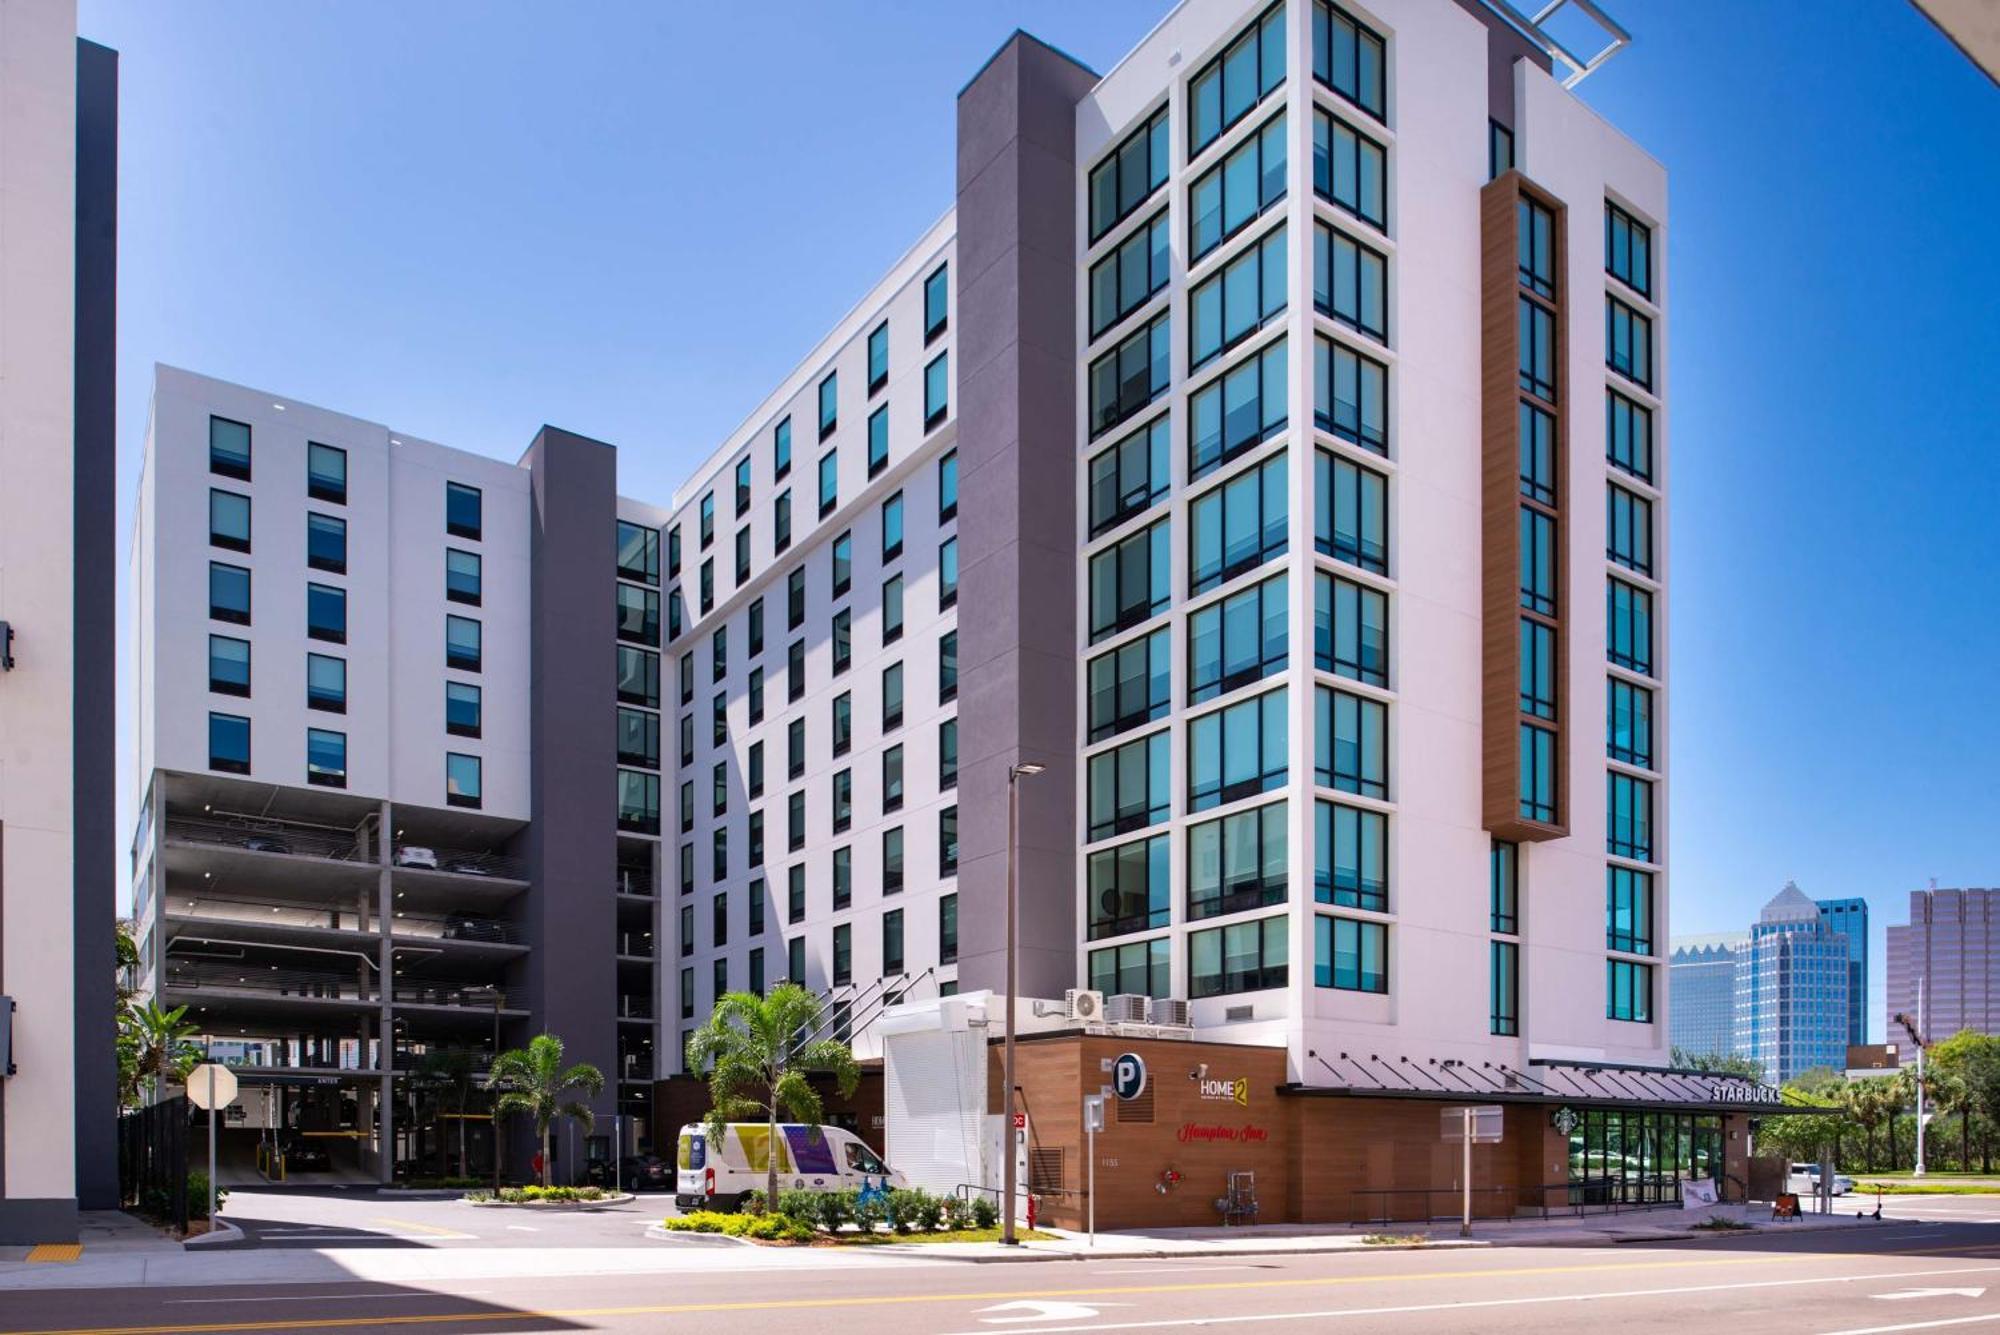 Home2 Suites By Hilton Tampa Downtown Channel District Exterior photo